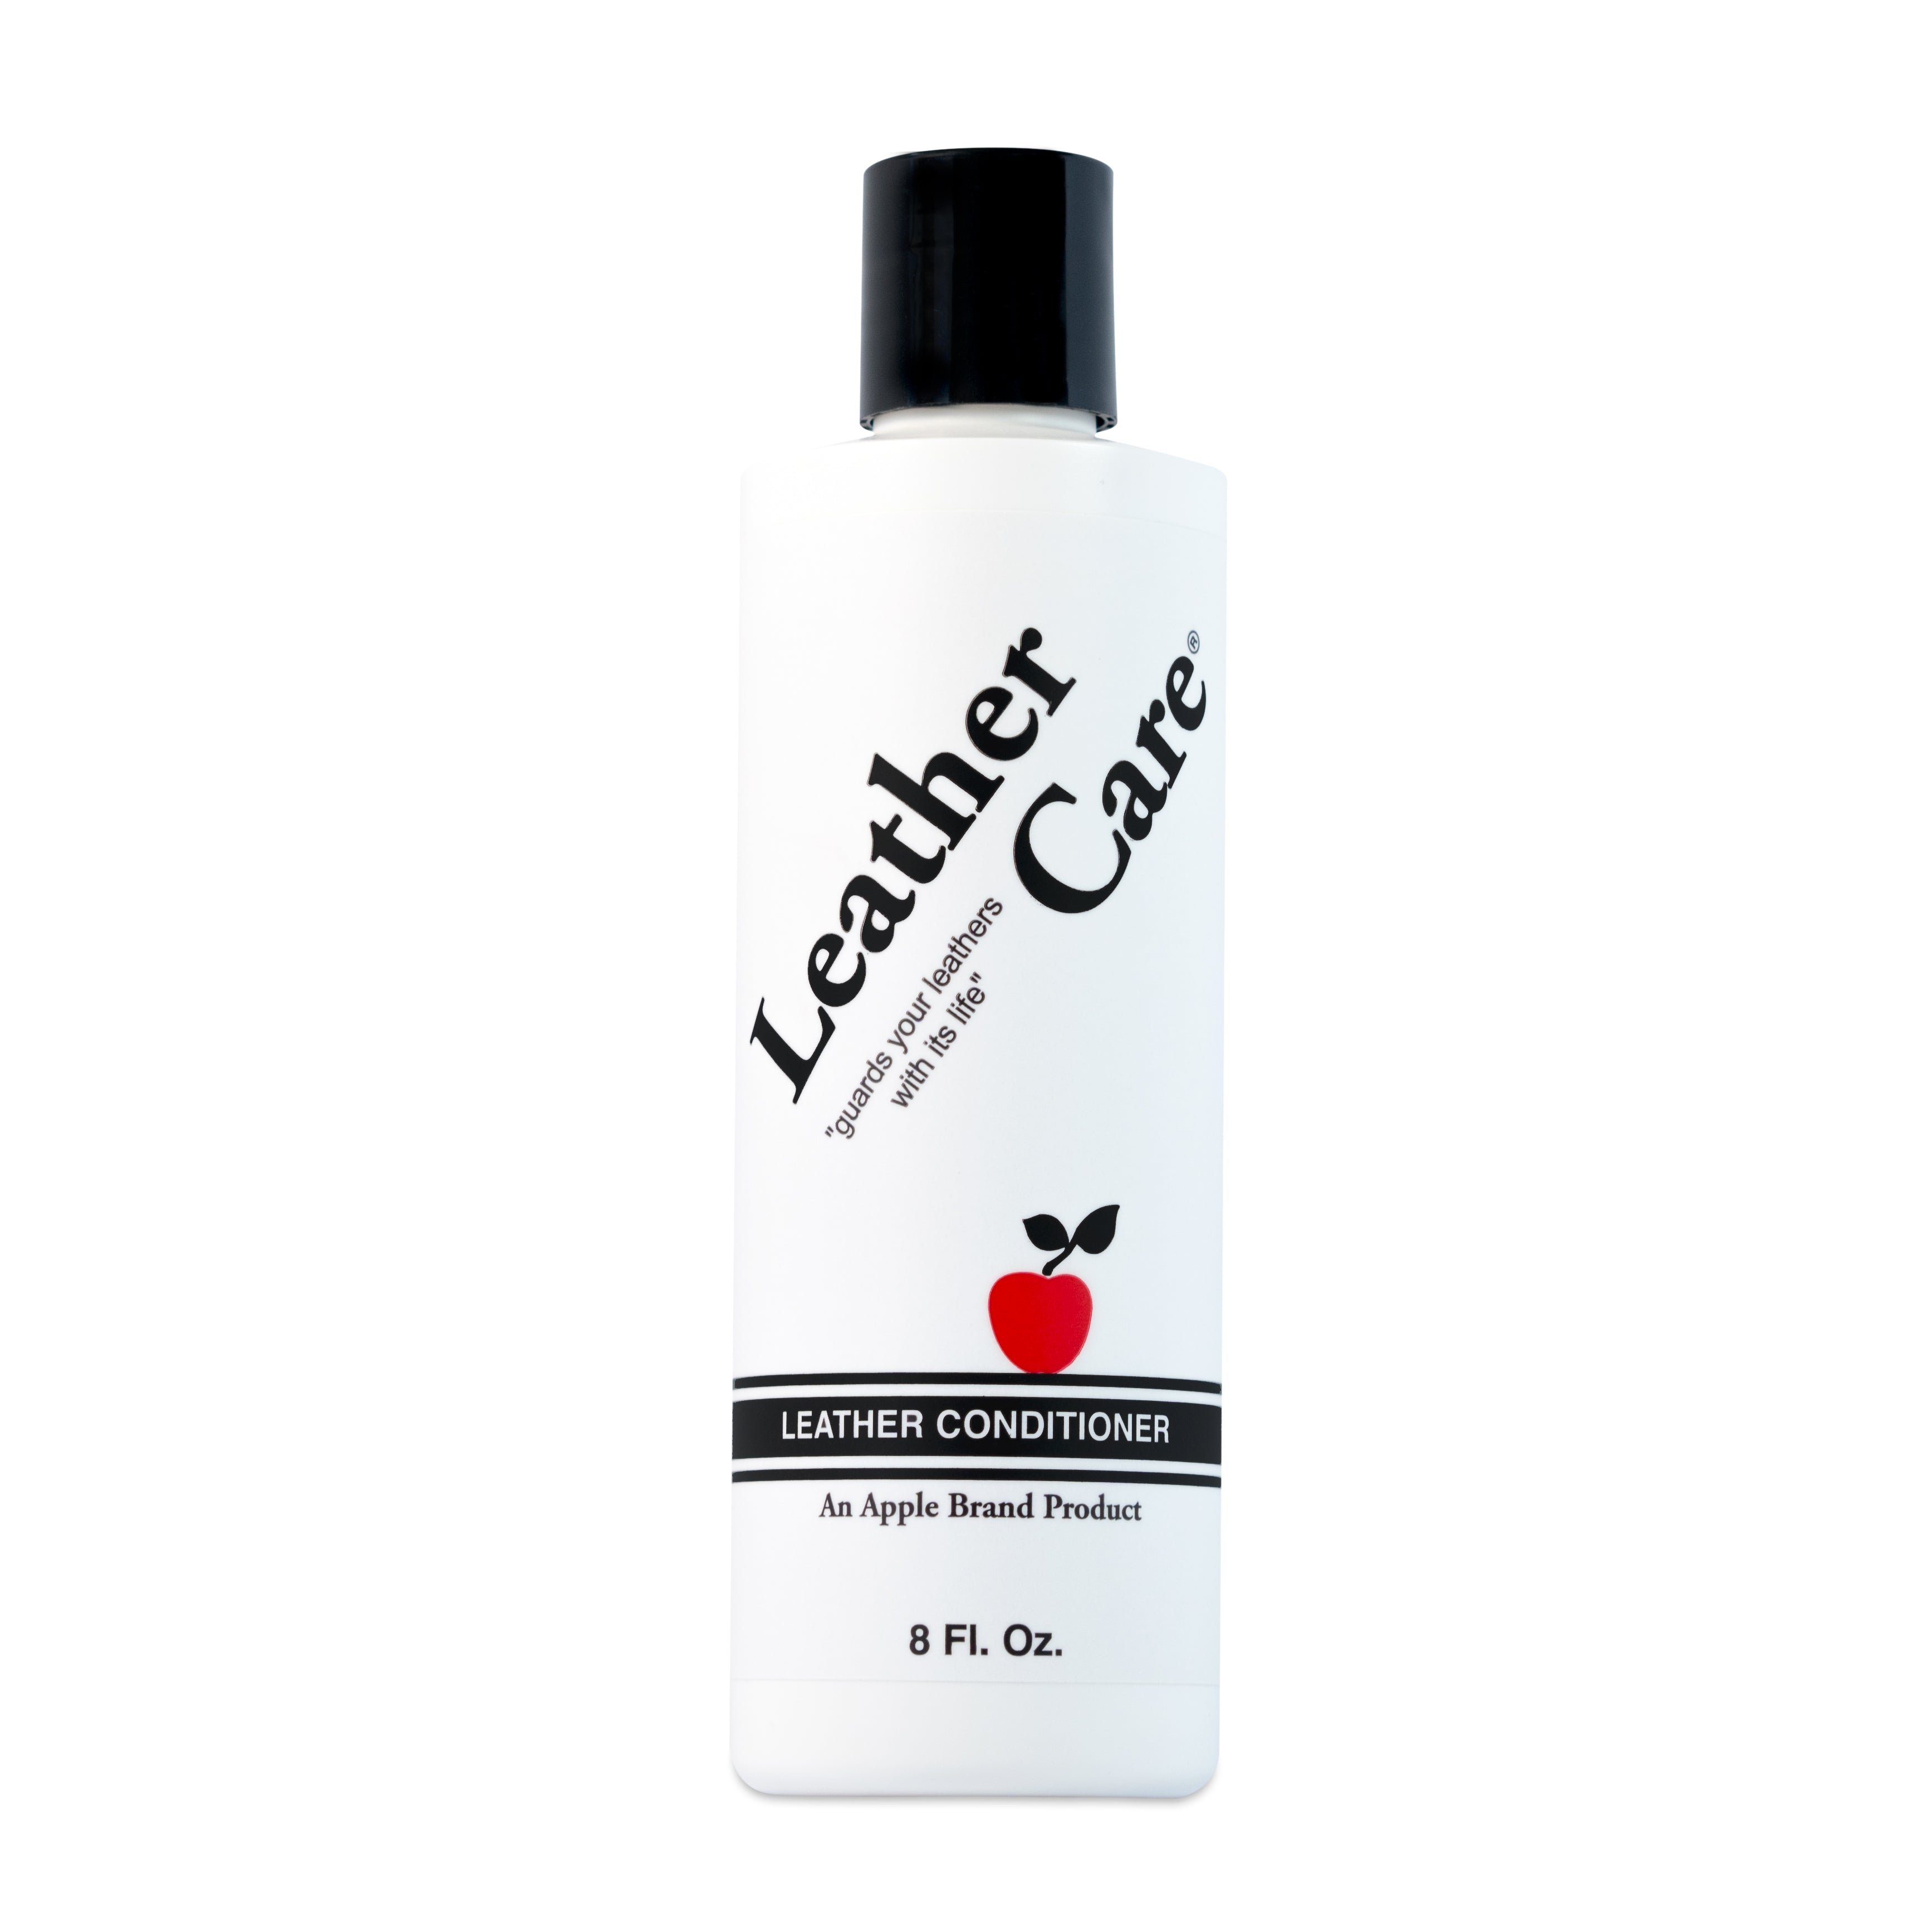  Customer reviews: Leather Purse Cleaner & Conditioner for  Handbags, Designer Bags, and Luxury Purses, Recommended Leather Cleaner for  Handbags & Leather Conditioner for Purses by Combat Cleaner